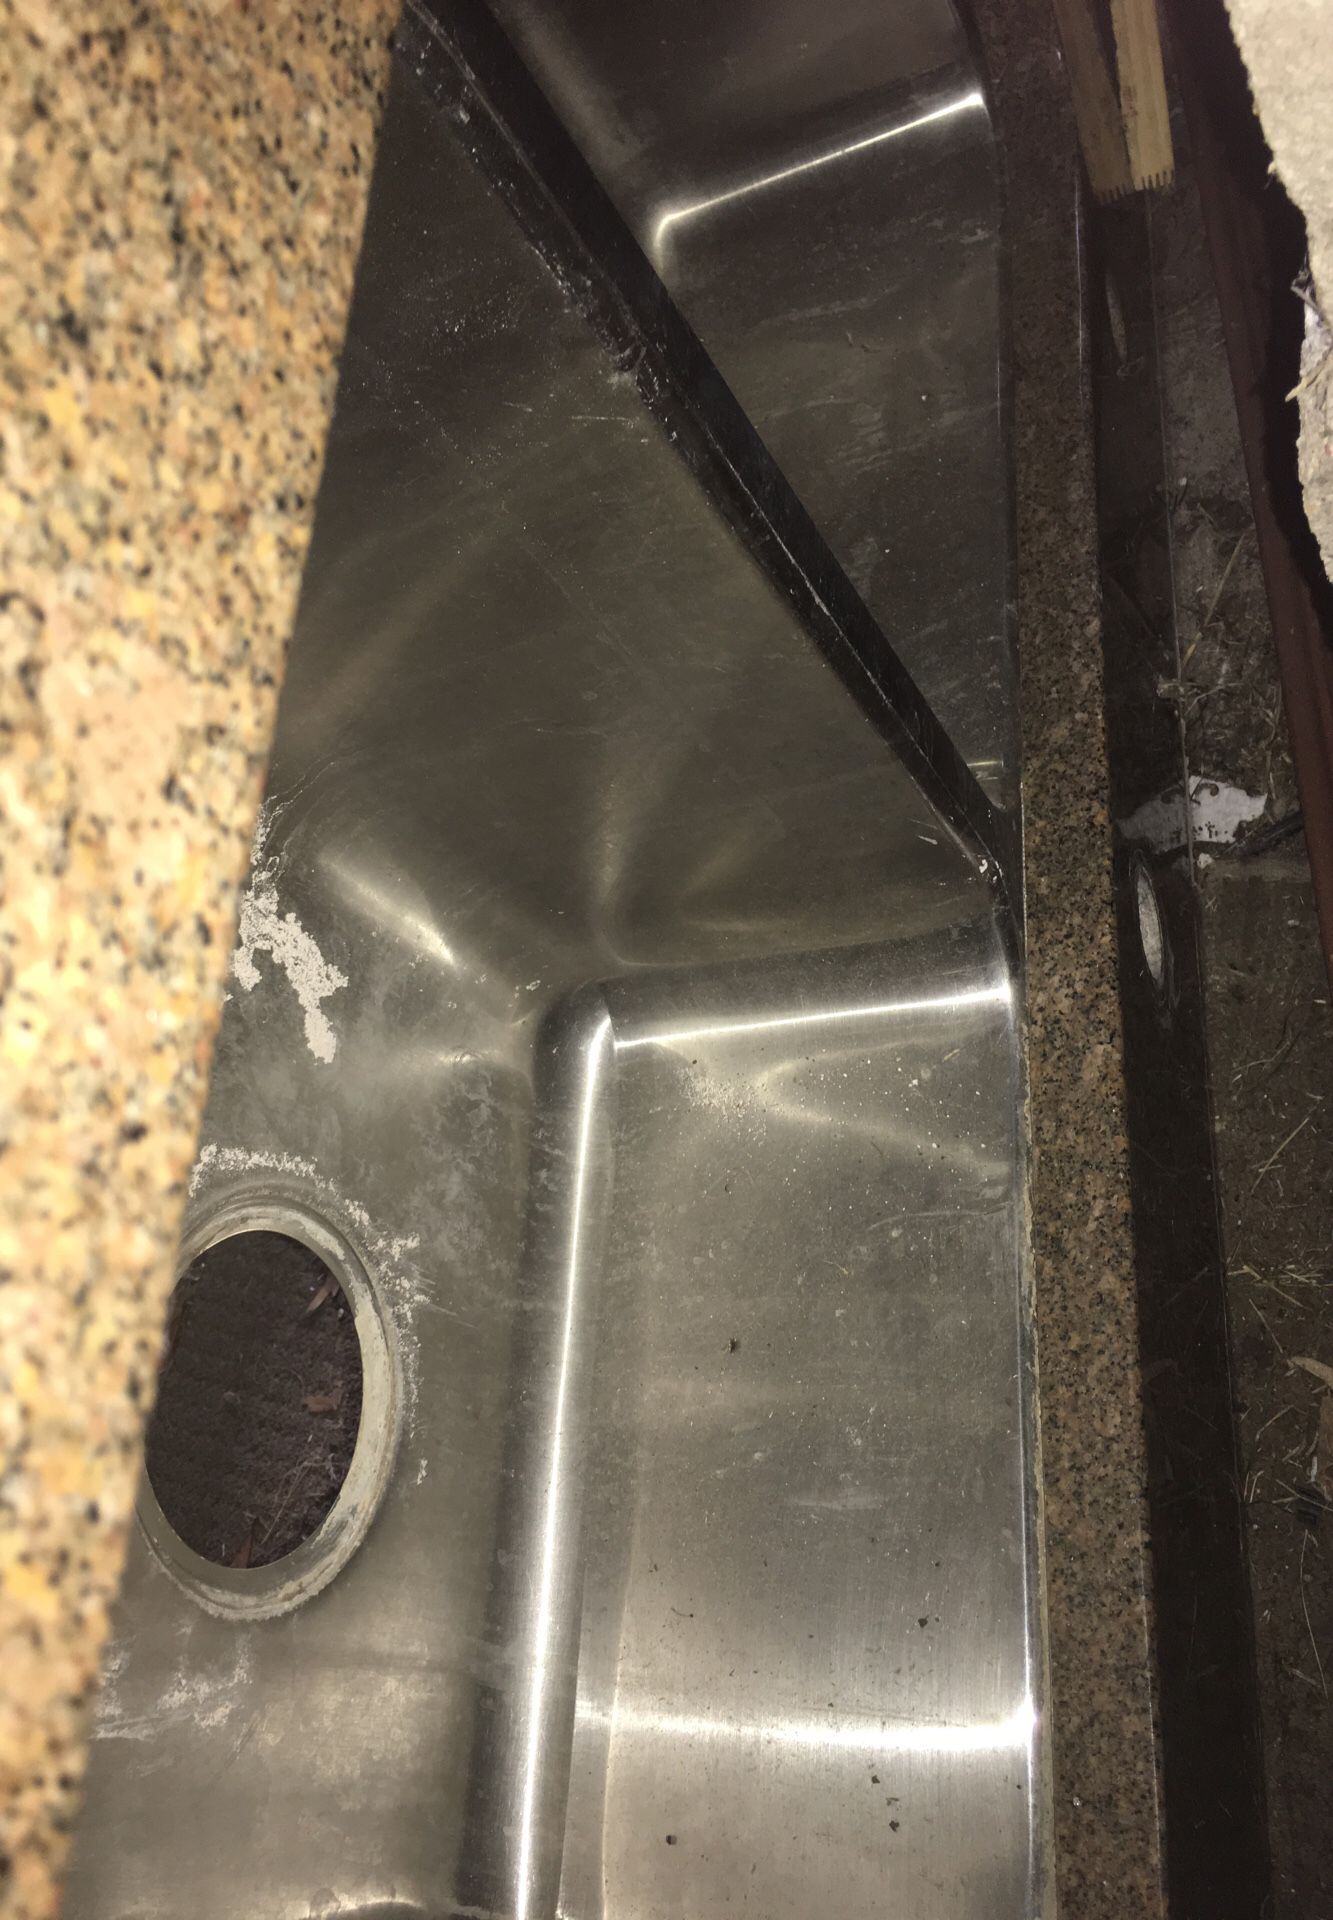 Double Stainless Steel Kitchen sink with 3 feet of granite attached